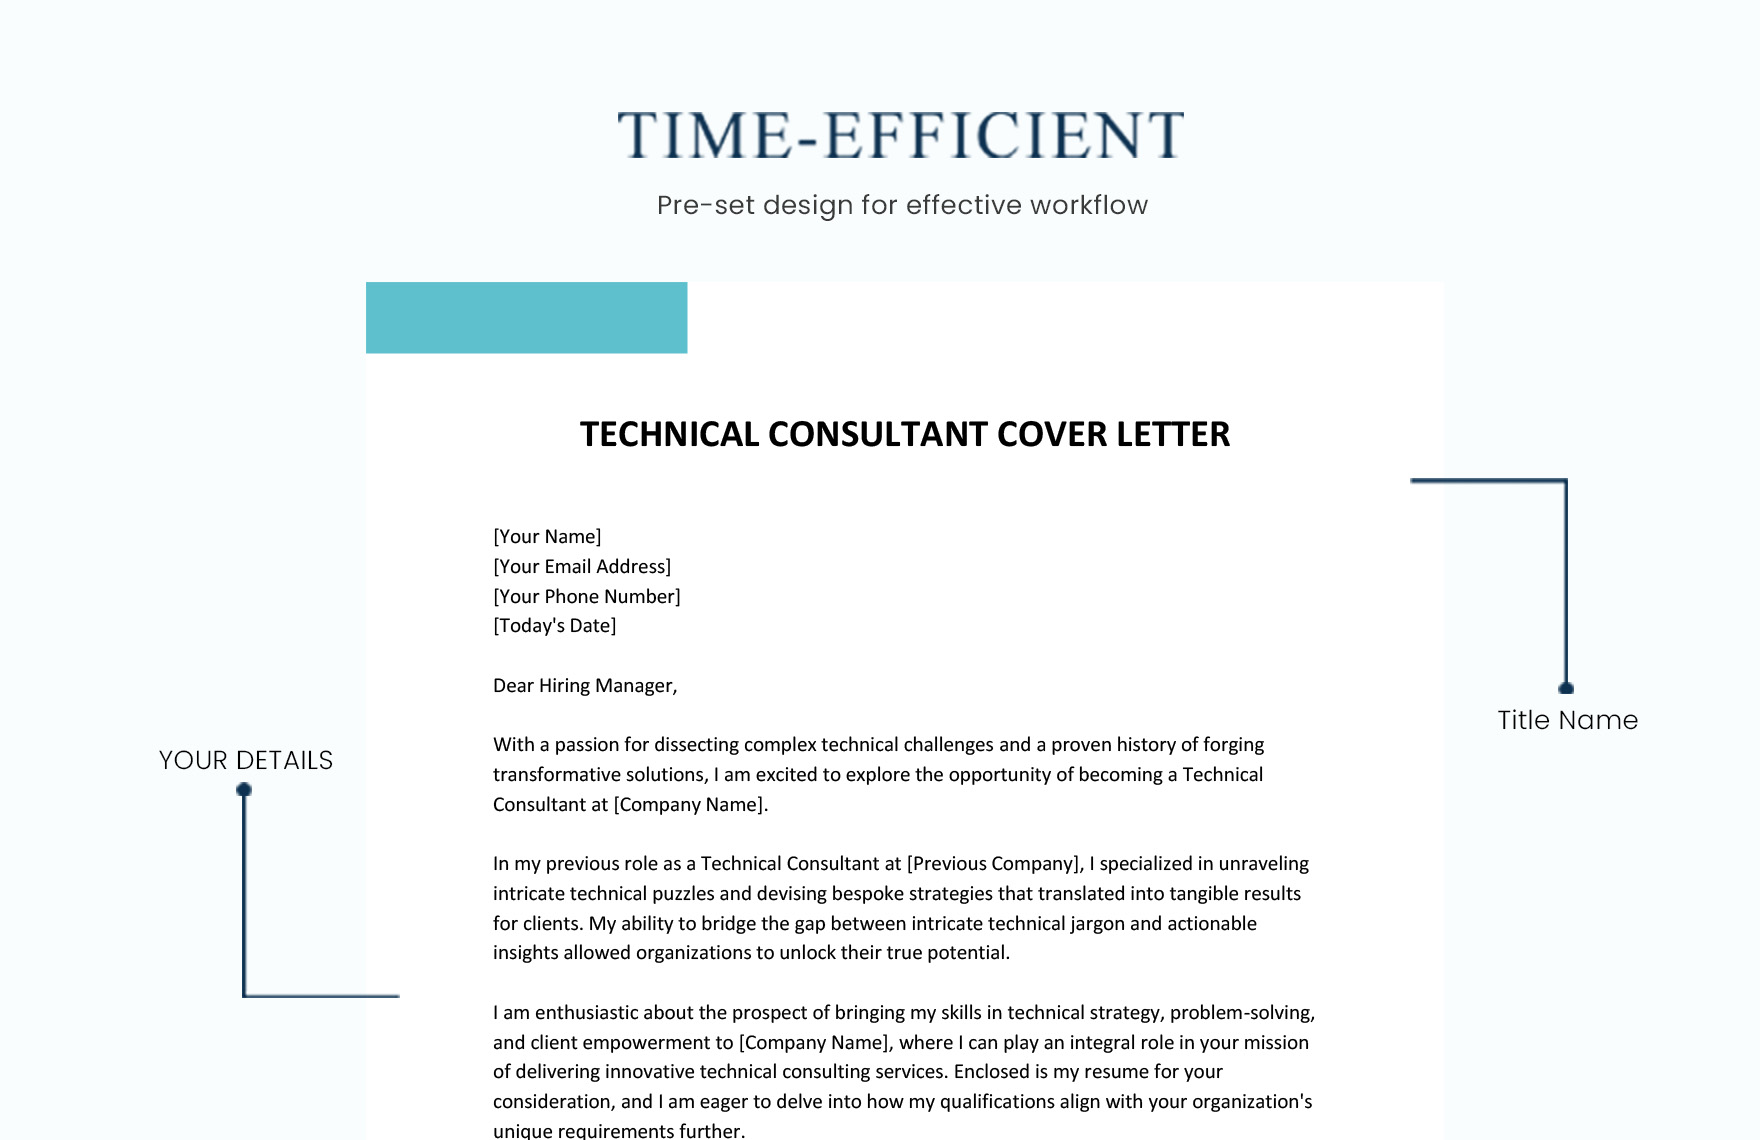 Technical Consultant Cover Letter